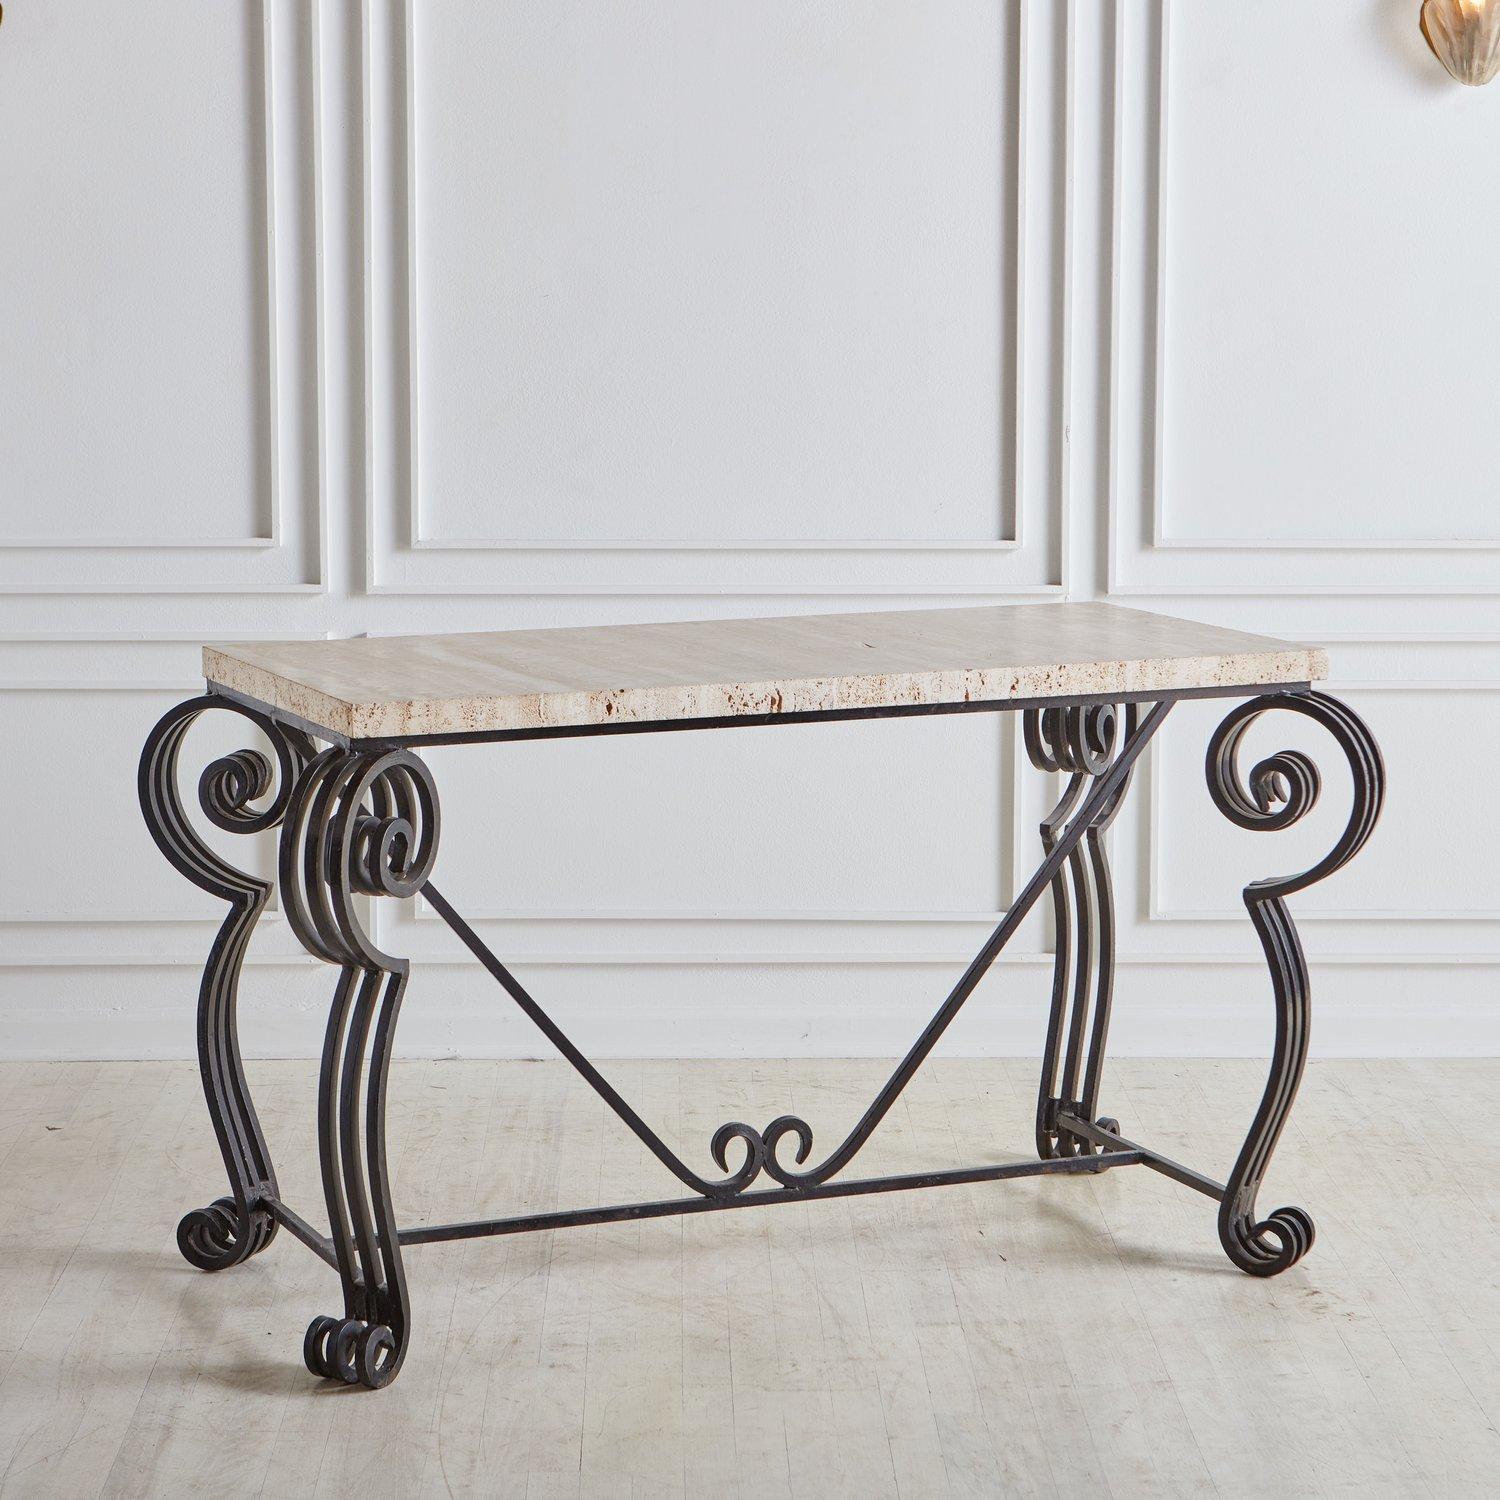 A vintage Italian desk or entryway table featuring a black metal base with four curved legs, each constructed with three square tubular rods. This desk has a rectangular 1.625” thick travertine top with beautiful taupe hues. We love the curl details